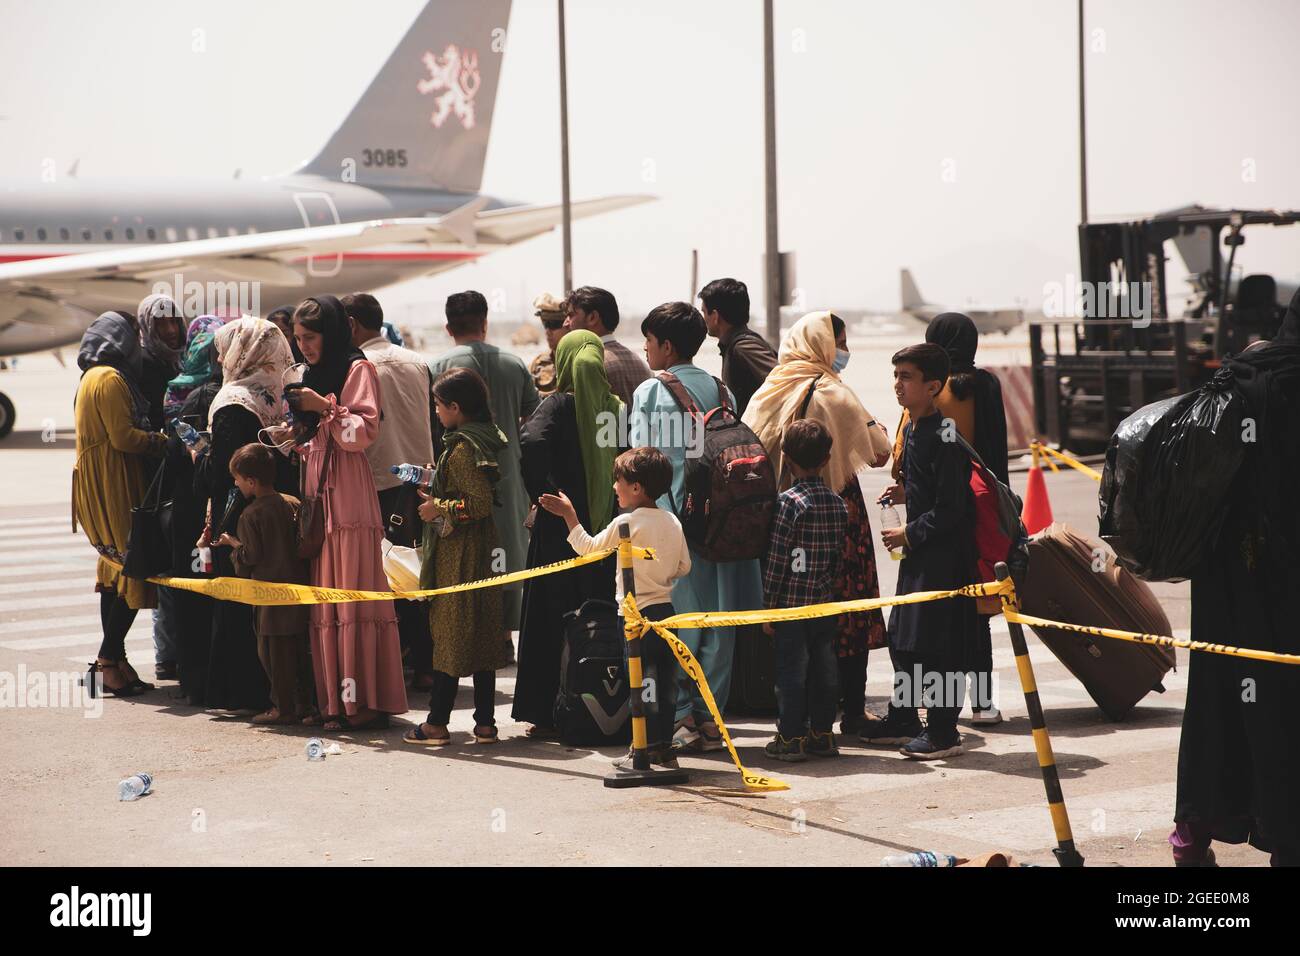 Kabul, Afghanistan. 18th Aug, 2021. Afghan civilians wait to board an aircraft for evacuation at Hamid Karzai International Airport as part of Operation Allies Refuge August 18, 2021 in Kabul, Afghanistan. Credit: Planetpix/Alamy Live News Stock Photo